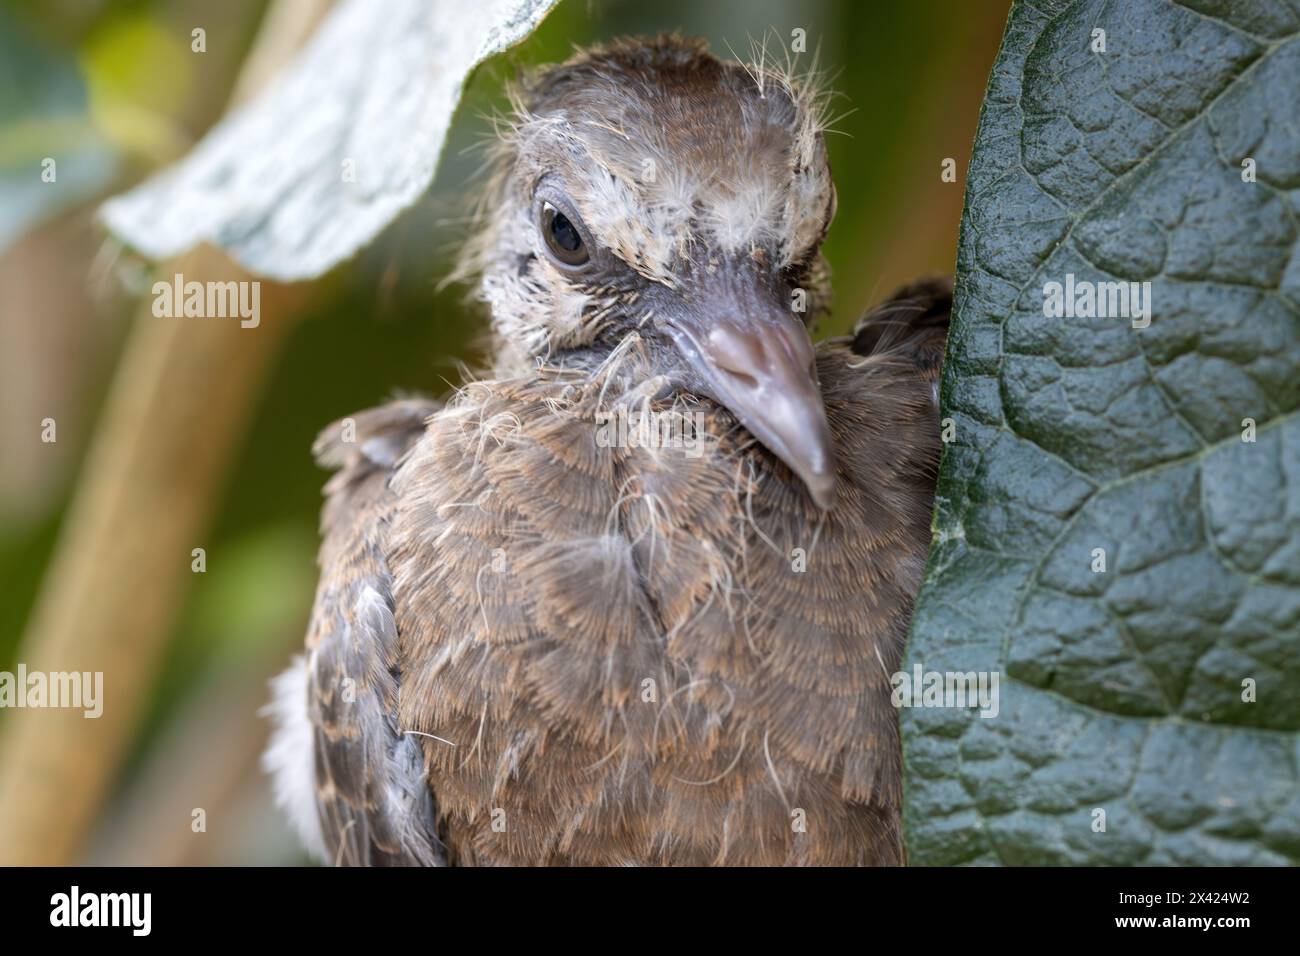 A baby pigeon that fell out of its nest in a tree is cling on a branch Stock Photo